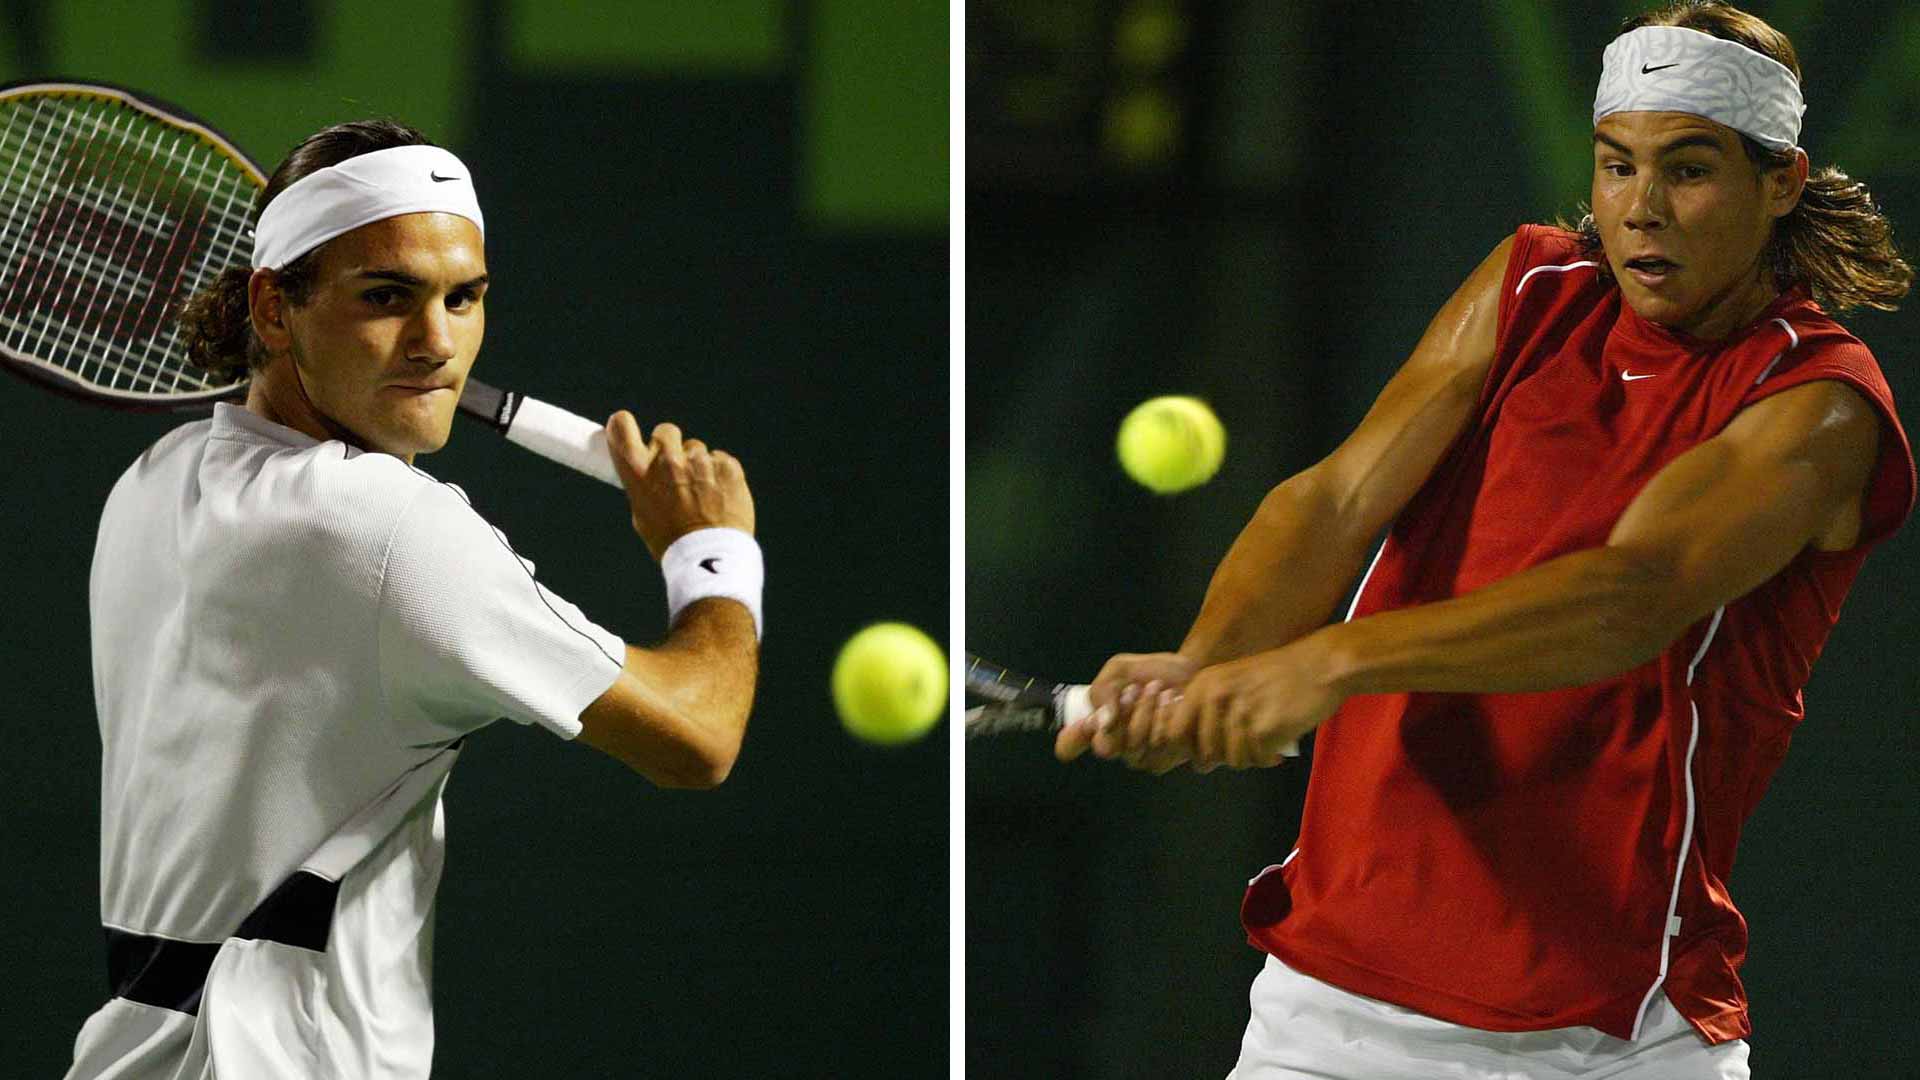 Roger Federer and Rafael Nadal first played one another in the third round at 2004 Miami.